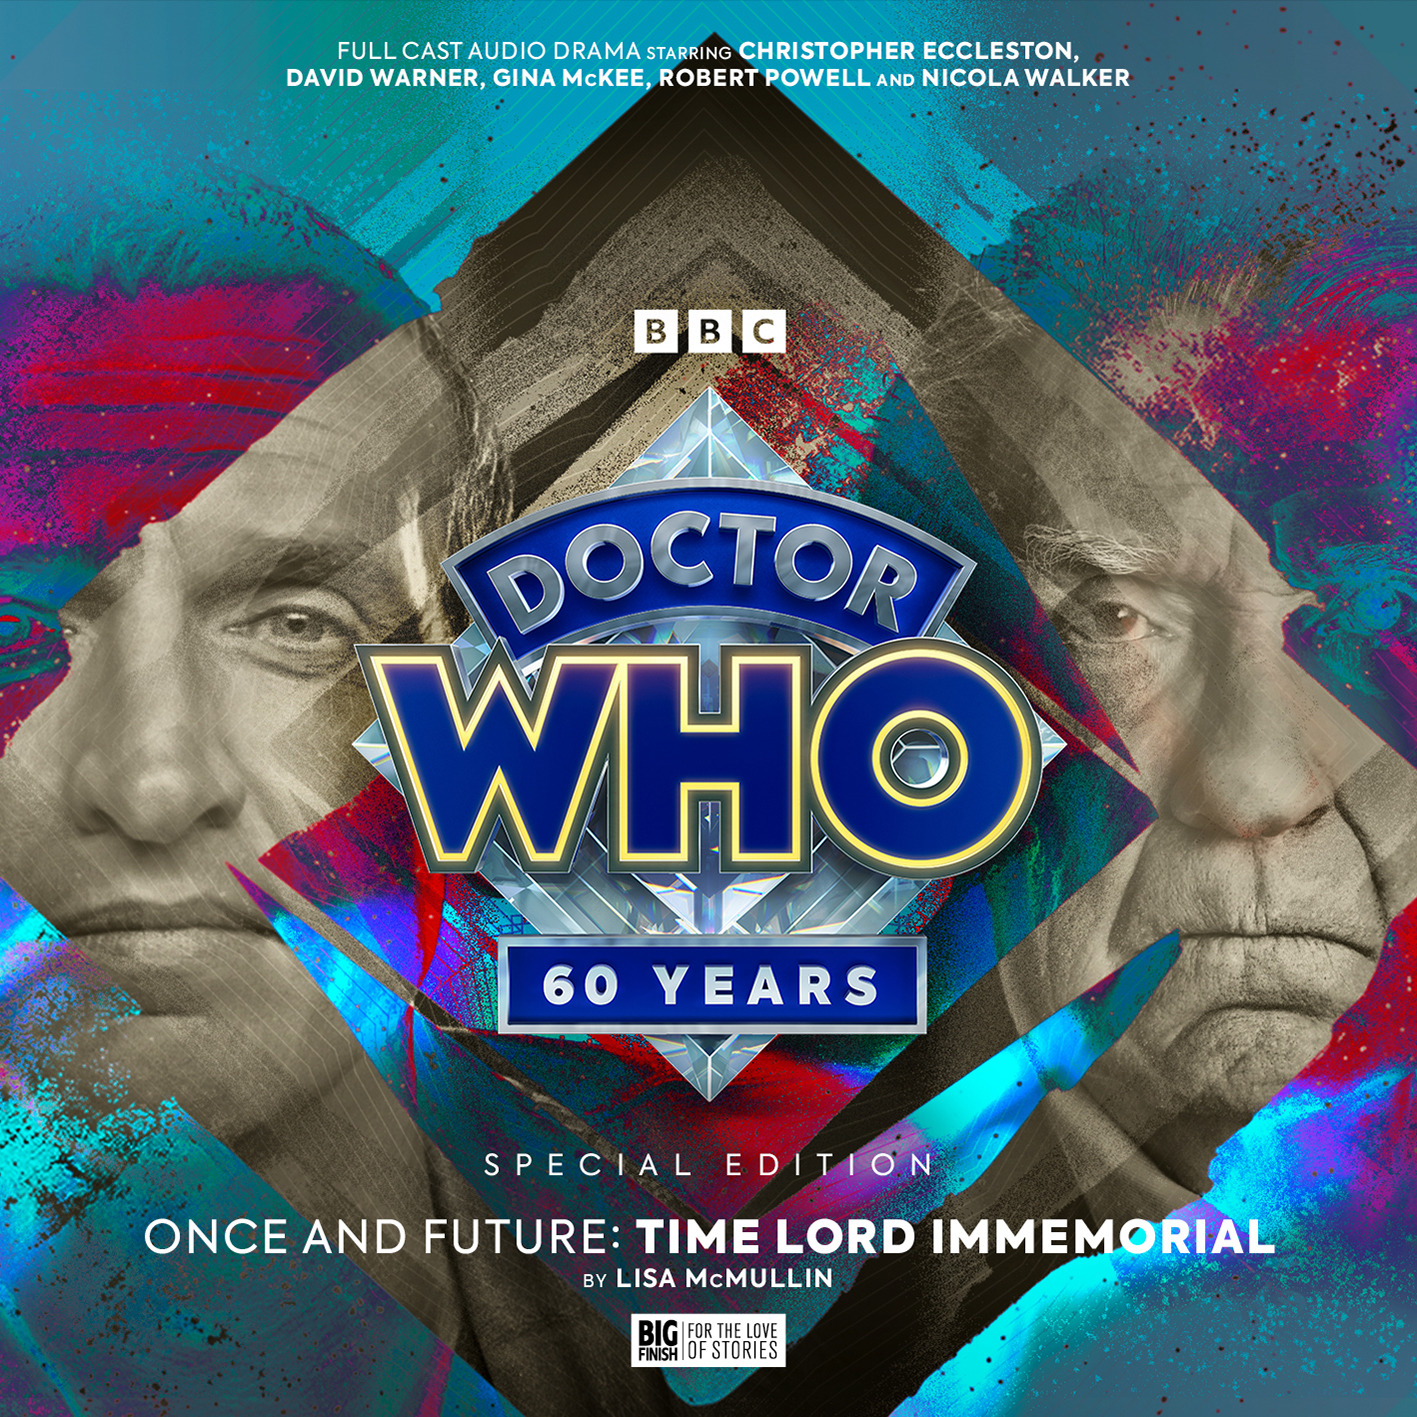 Time Lord Immemorial